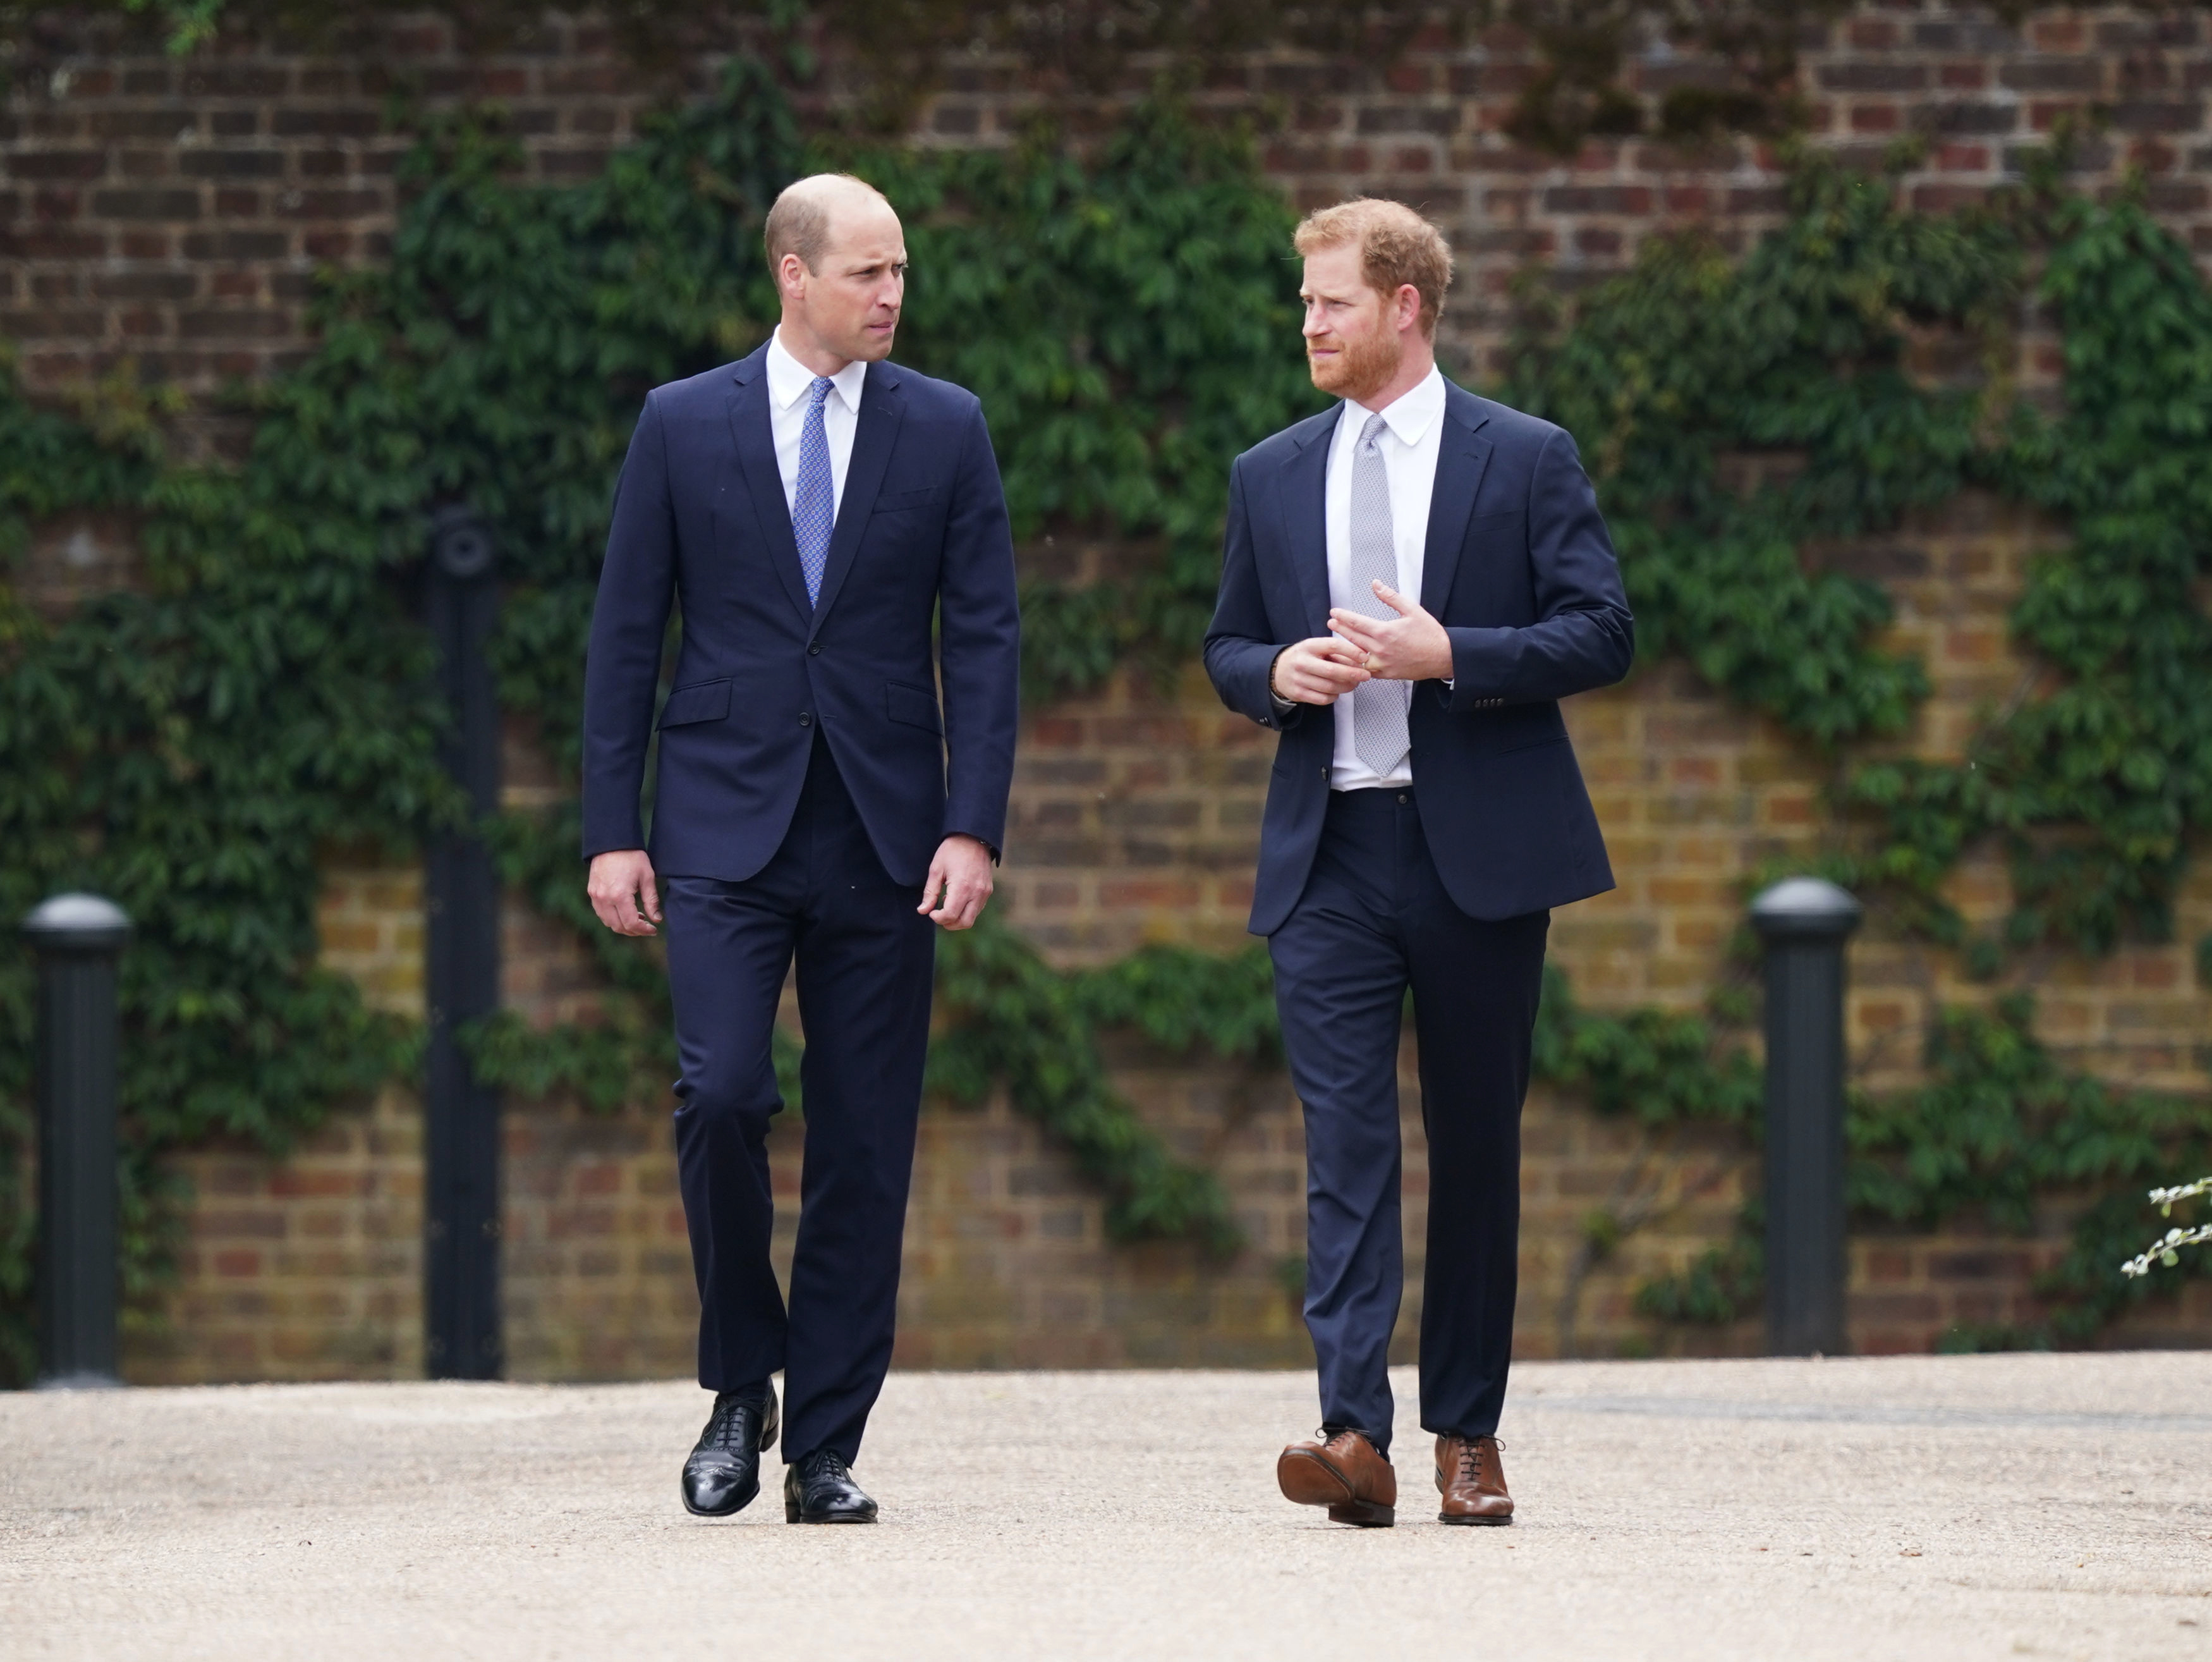 Prince William and Prince Harry arriving together for the unveiling of a statue they commissioned of their mother, Princess Diana